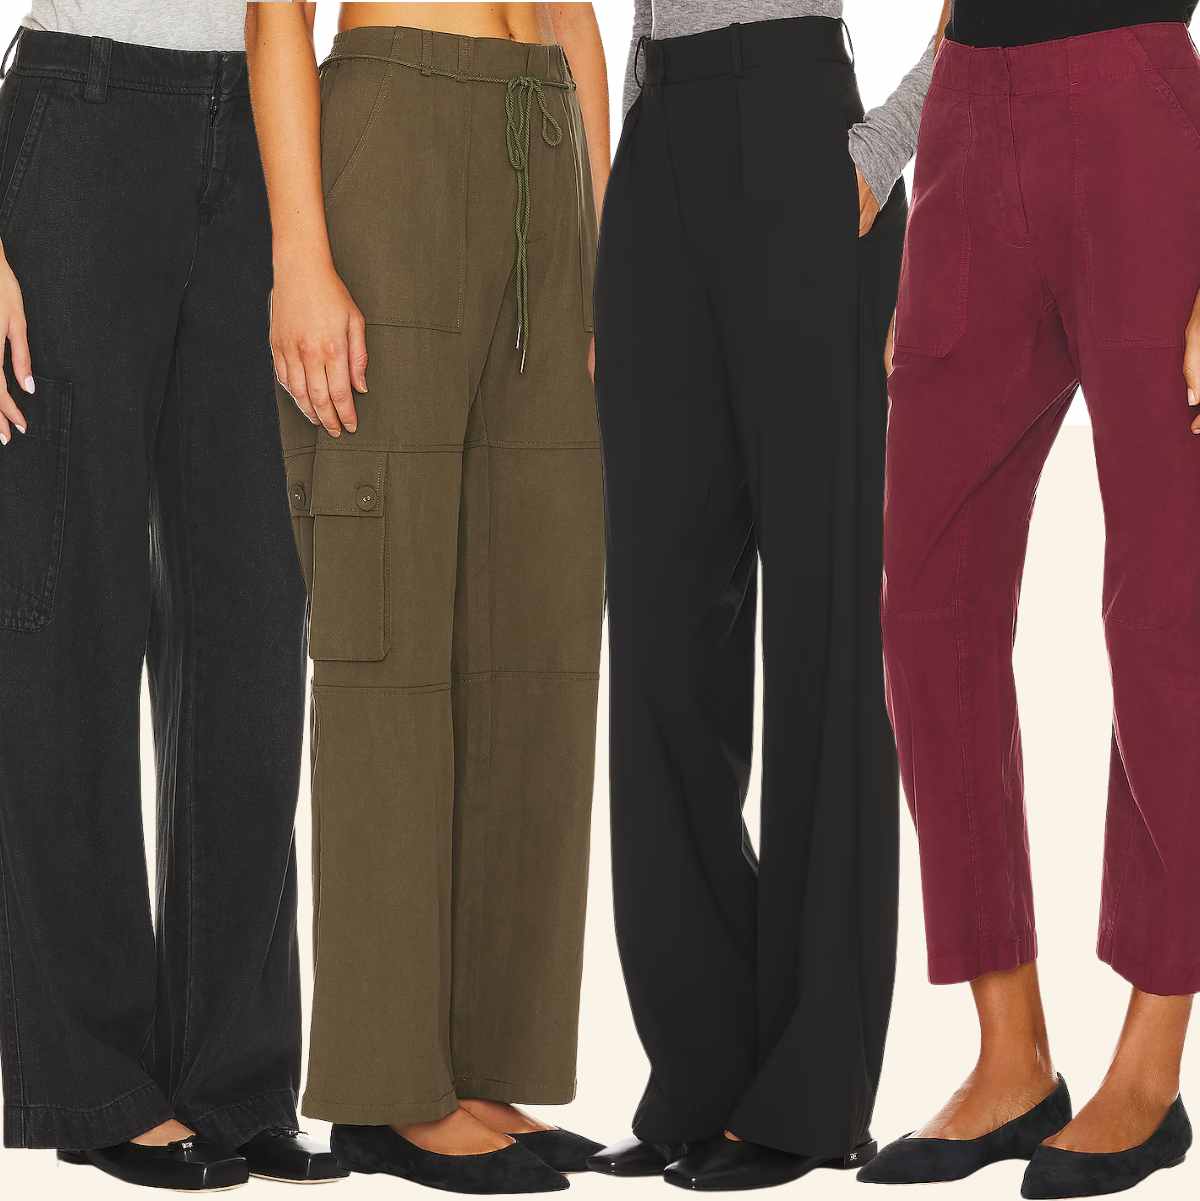 Collage of cropped pant view of 4 women wearing different ballerina with wide leg jeans of different lengths.